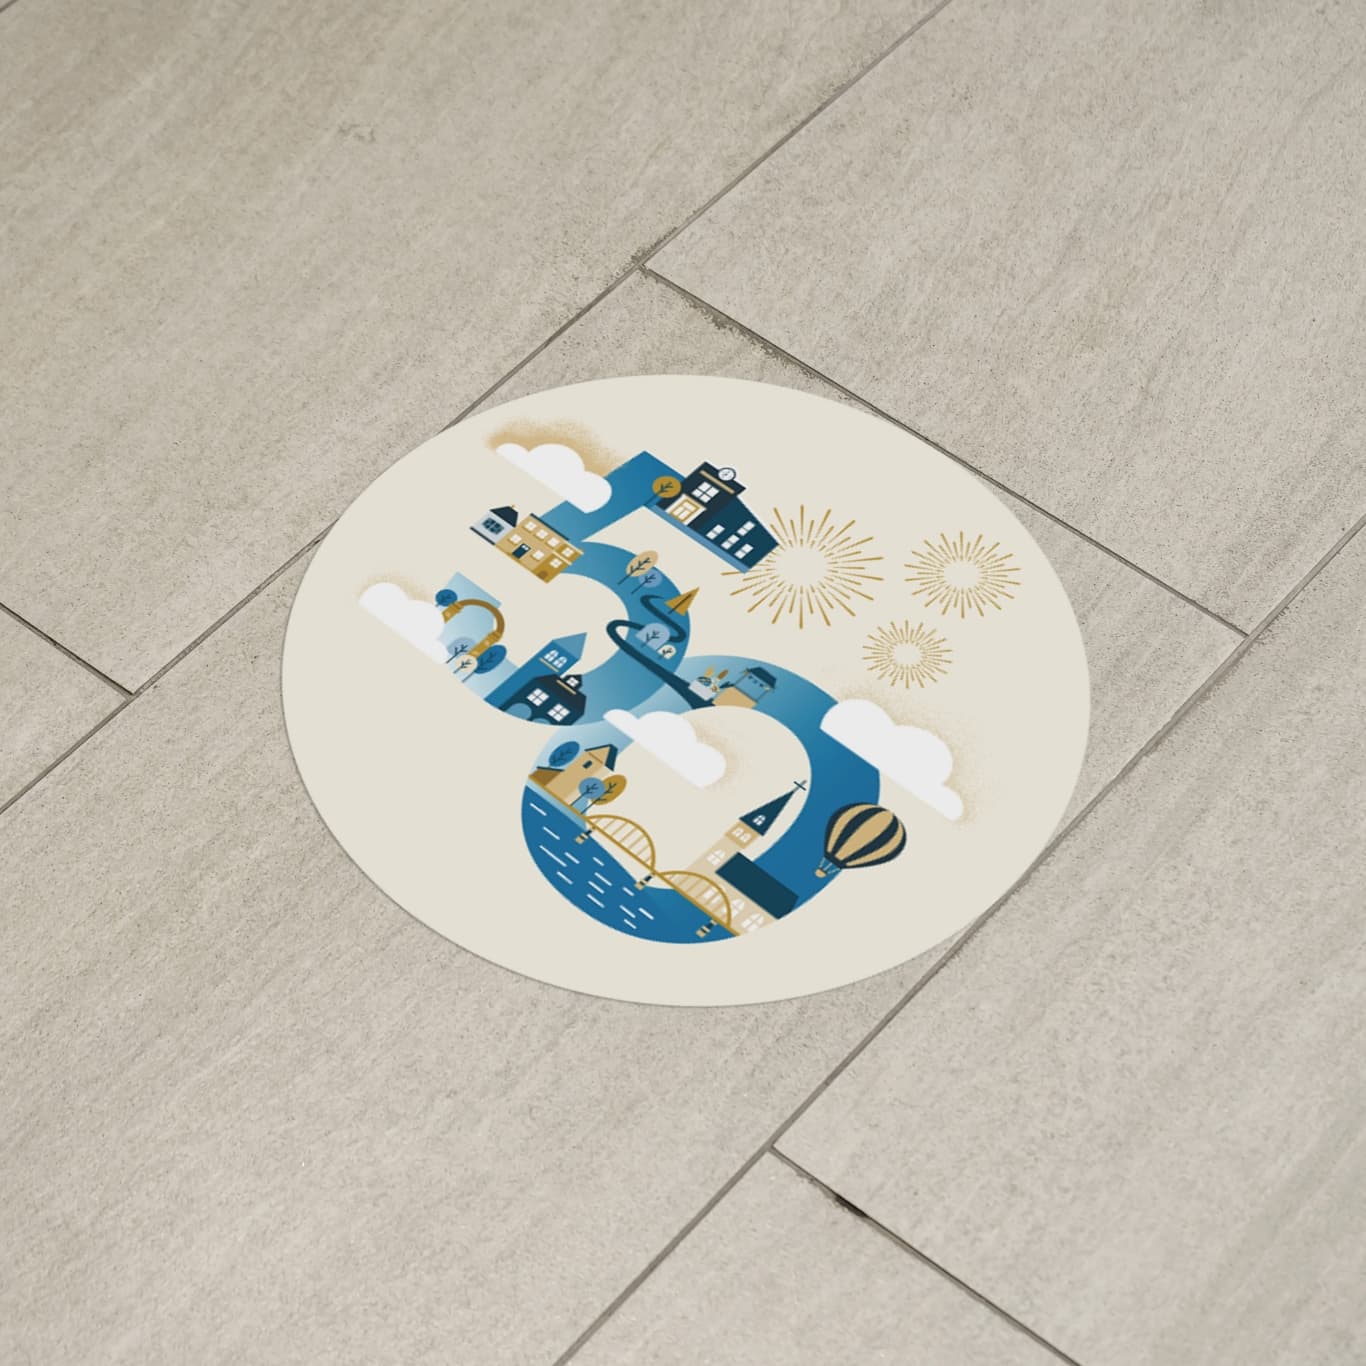 Floor decal with anniversary logo